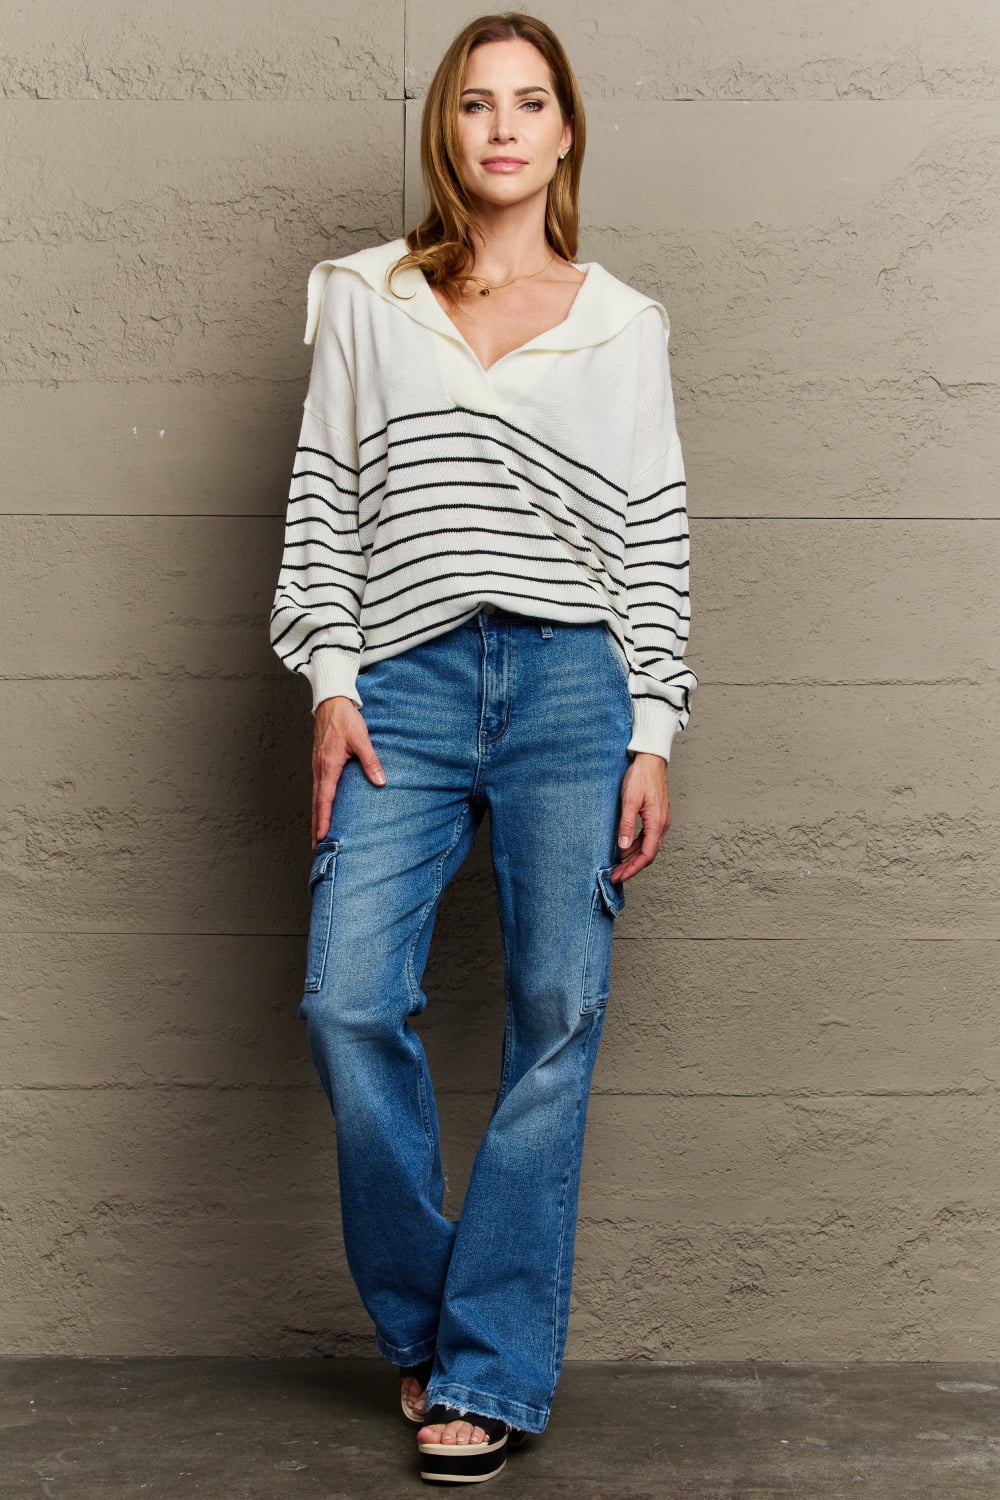 Make Me Smile Striped Oversized Knit Top - Women’s Clothing & Accessories - Shirts & Tops - 4 - 2024